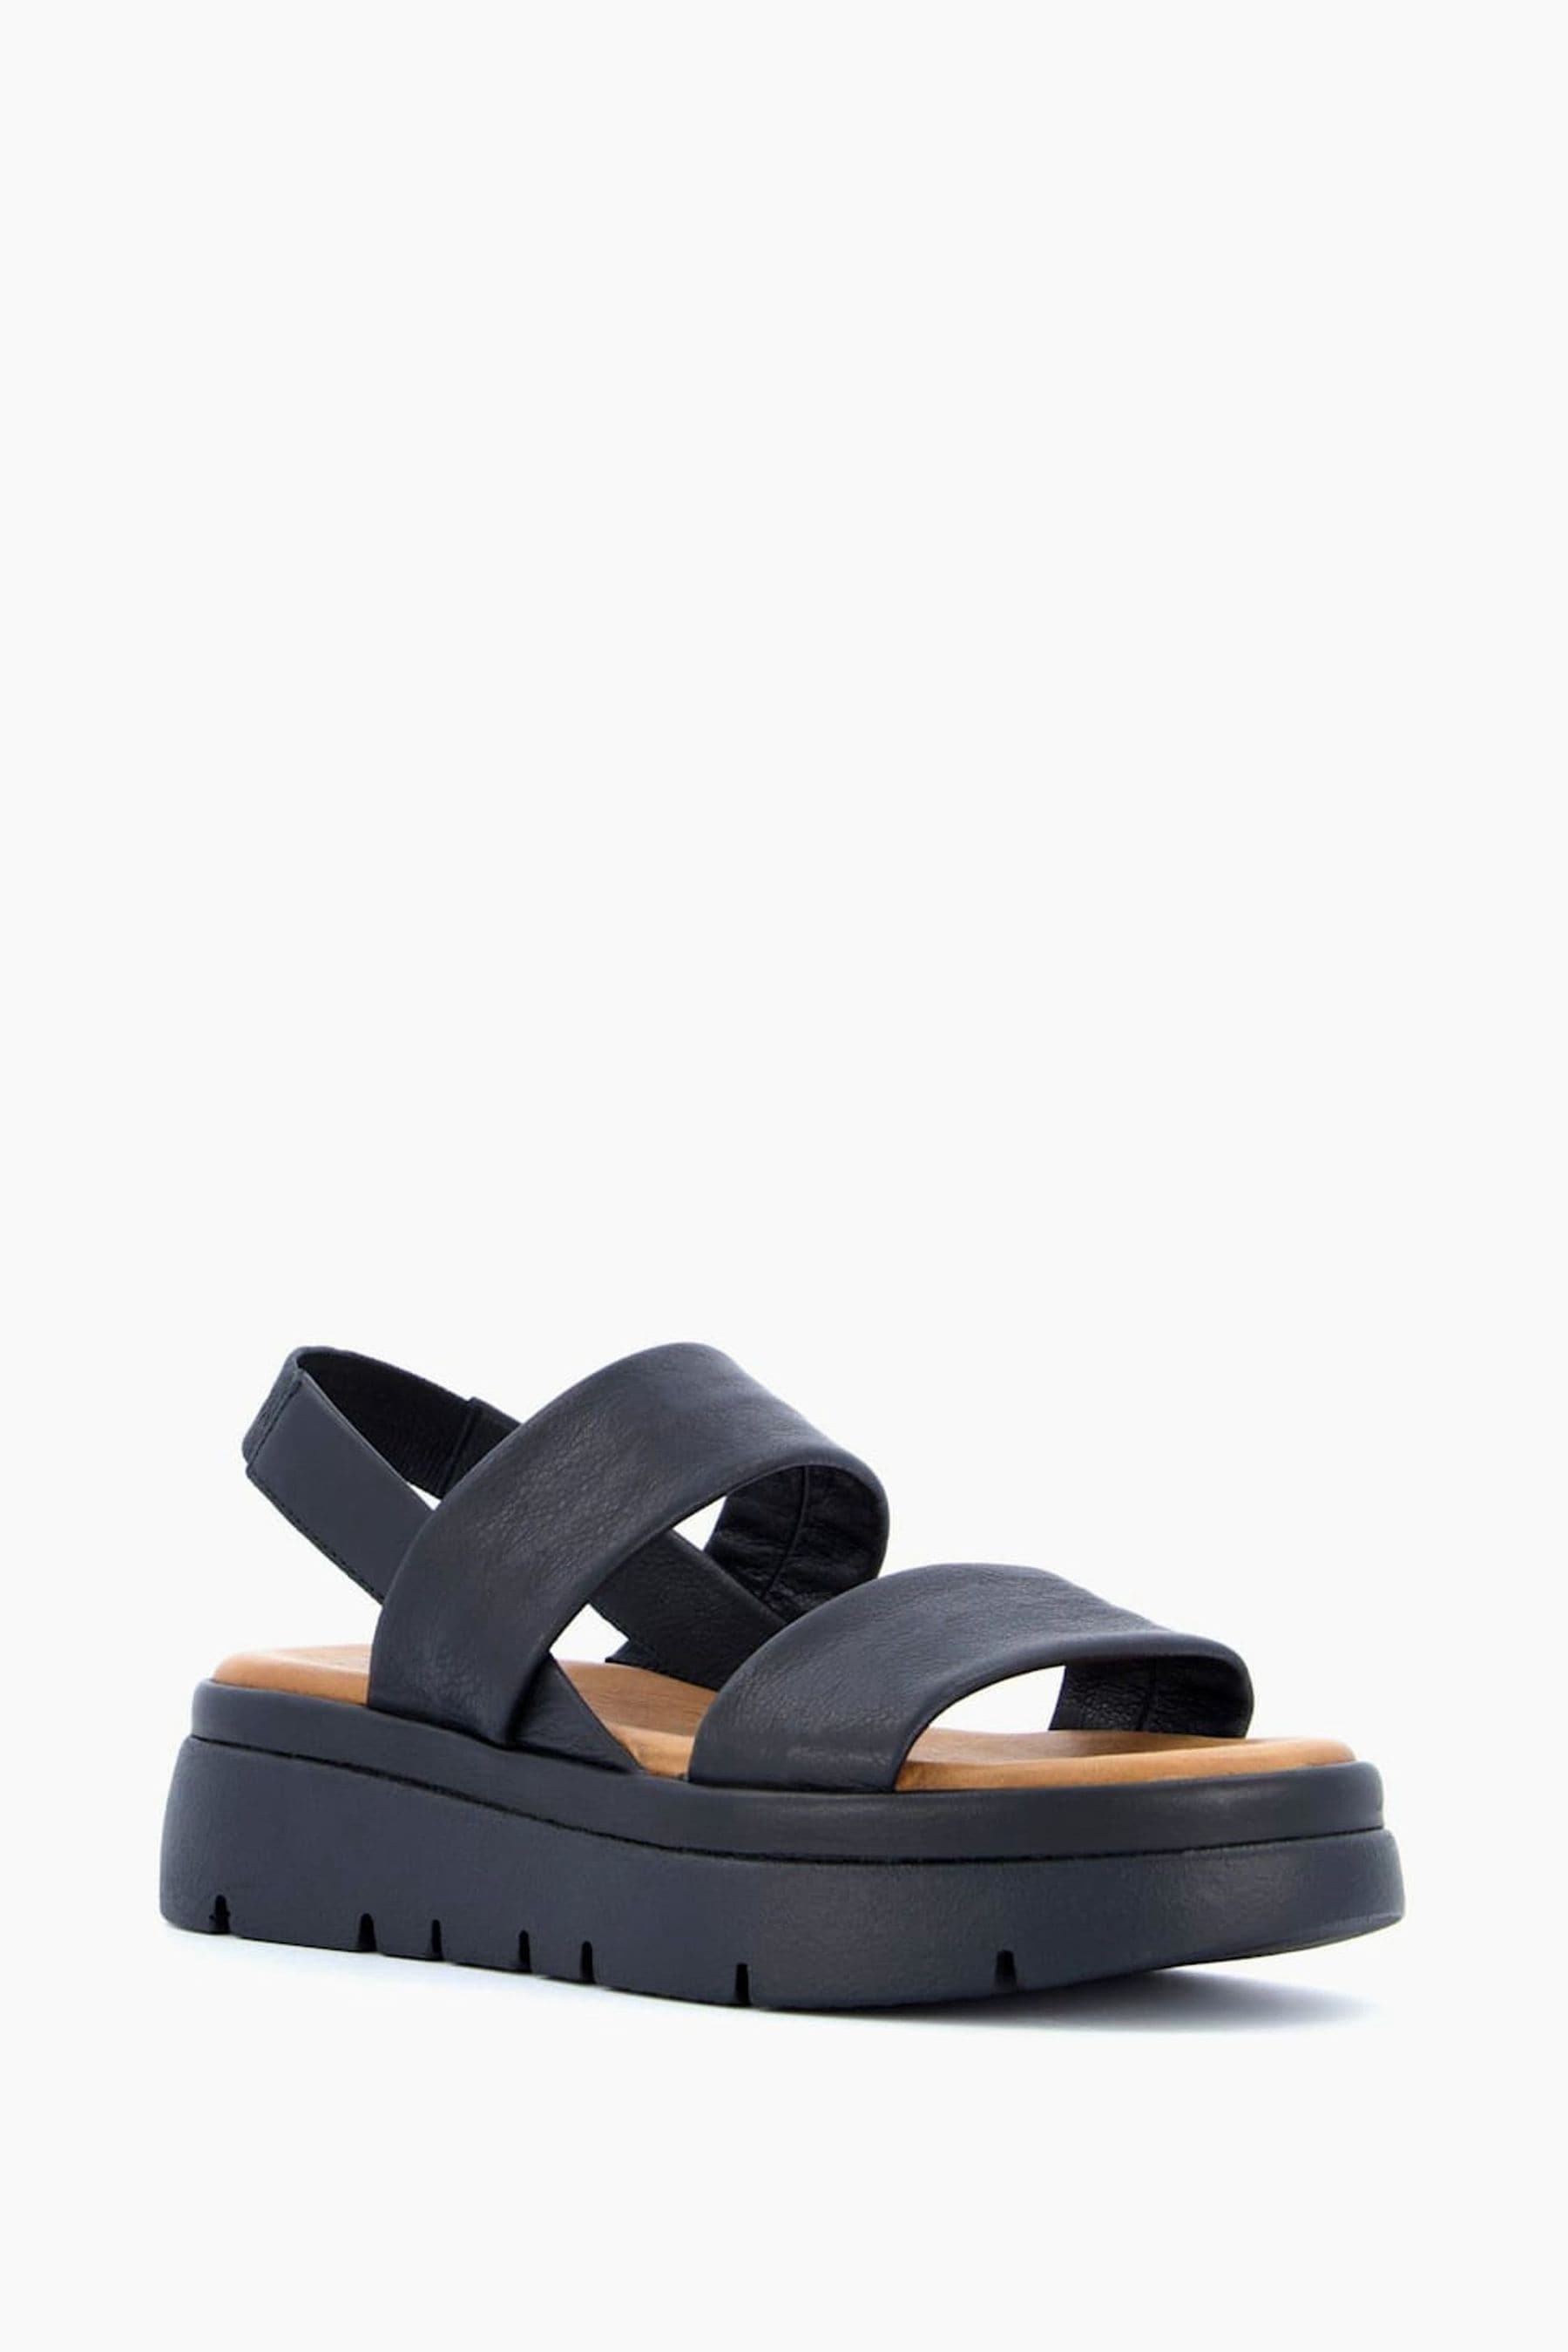 Buy Dune London Location Padded Flatform Sandals from the Next UK ...